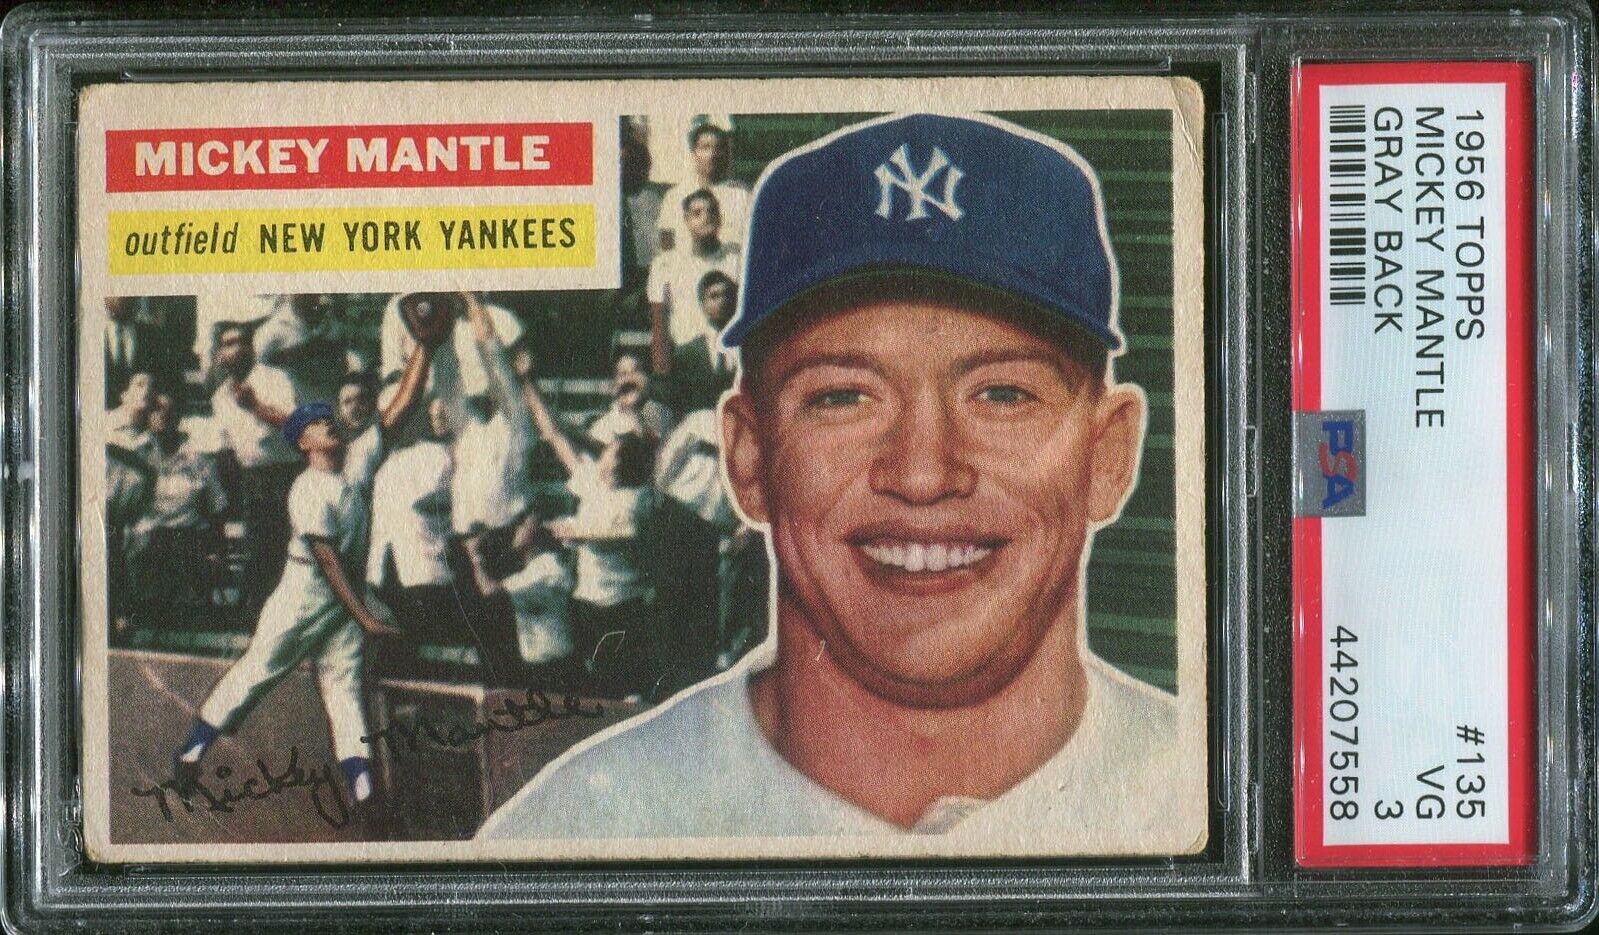 1956 Topps Mickey Mantle Graded PSA 3 Condition